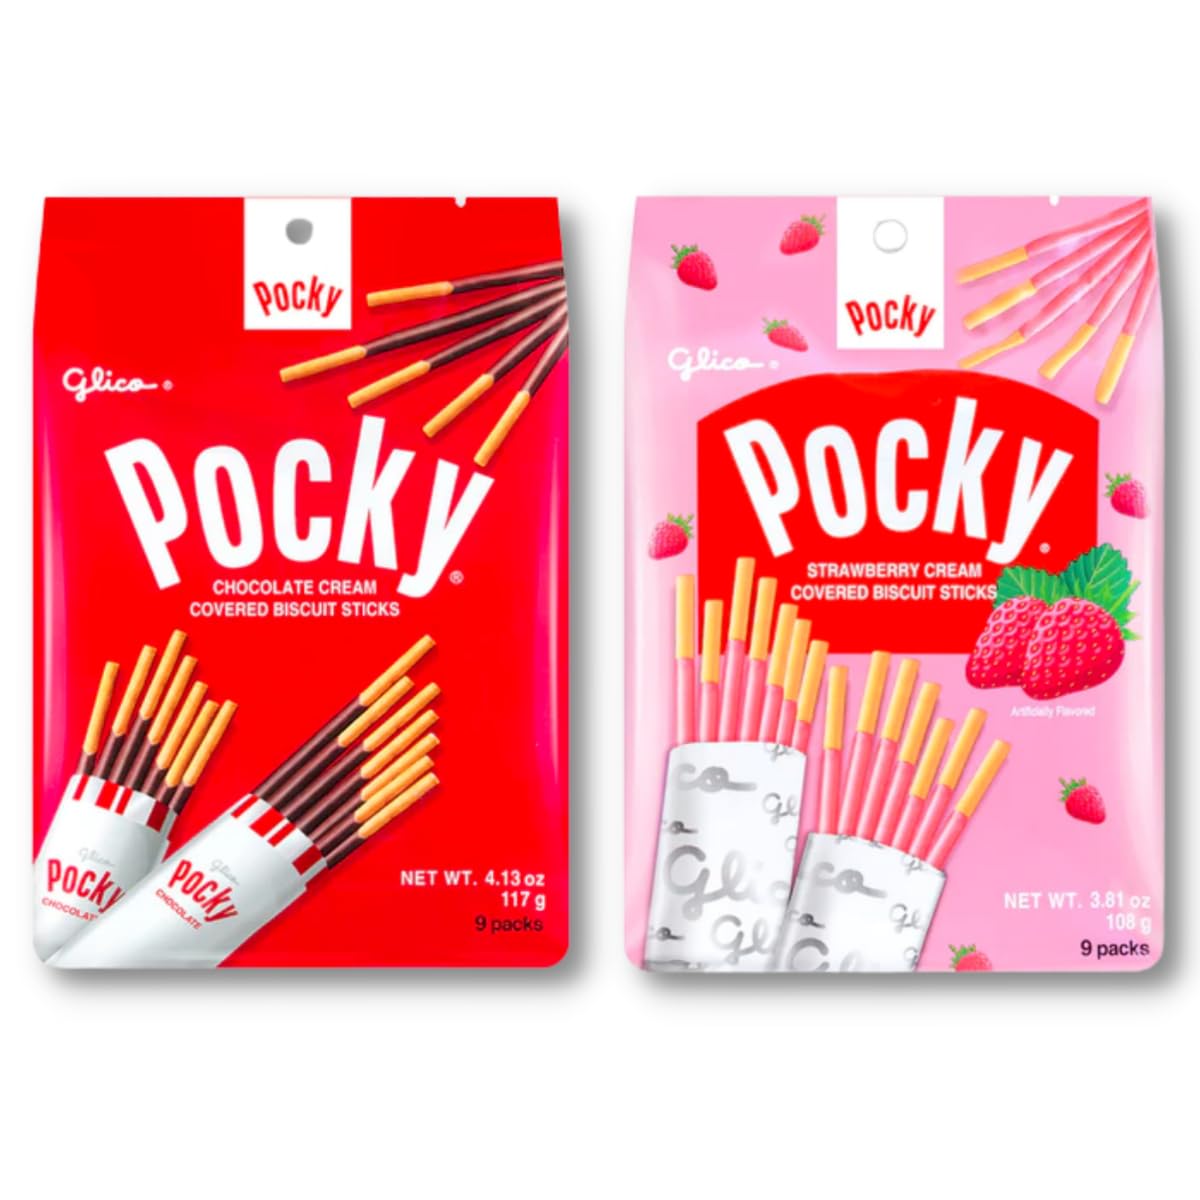 Pocky Sticks, Family Pack, 2 Packs Variety Pack of Chocolate and Strawberry  Cream Covered Biscuit, 9 Count Per Pack, Japanese Snacks 